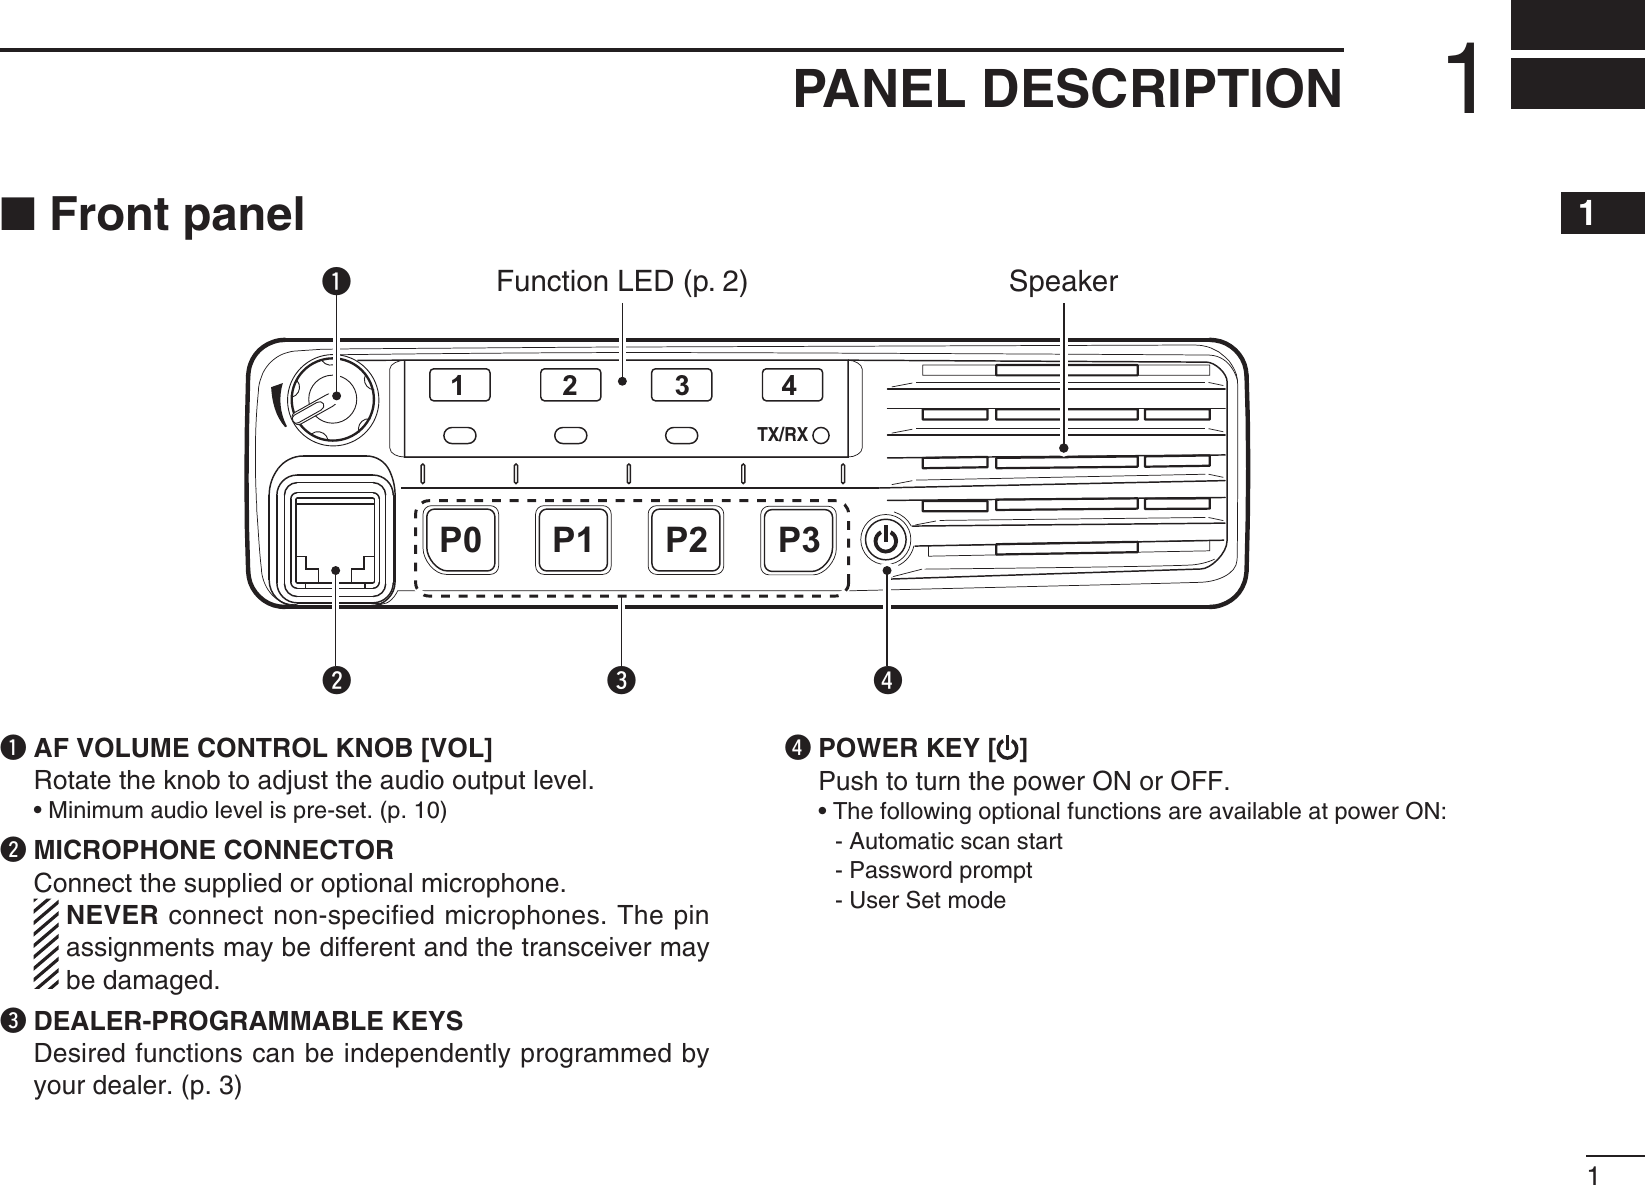 11PANEL DESCRIPTION12345678910111213141516TX/RX1234P0 P1 P2 P3qeSpeakerFunction LED (p. 2)rwN Front panelq AF VOLUME CONTROL KNOB [VOL]  Rotate the knob to adjust the audio output level. s-INIMUMAUDIOLEVELISPRESETPw MICROPHONE CONNECTOR  Connect the supplied or optional microphone.   NEVER connect non-speciﬁed microphones. The pin assignments may be different and the transceiver may be damaged.e DEALER-PROGRAMMABLE KEYS  Desired functions can be independently programmed by your dealer. (p. 3)r POWER KEY [ ]Push to turn the power ON or OFF. s4HEFOLLOWINGOPTIONALFUNCTIONSAREAVAILABLEATPOWER/.    - Automatic scan start    - Password prompt    - User Set mode